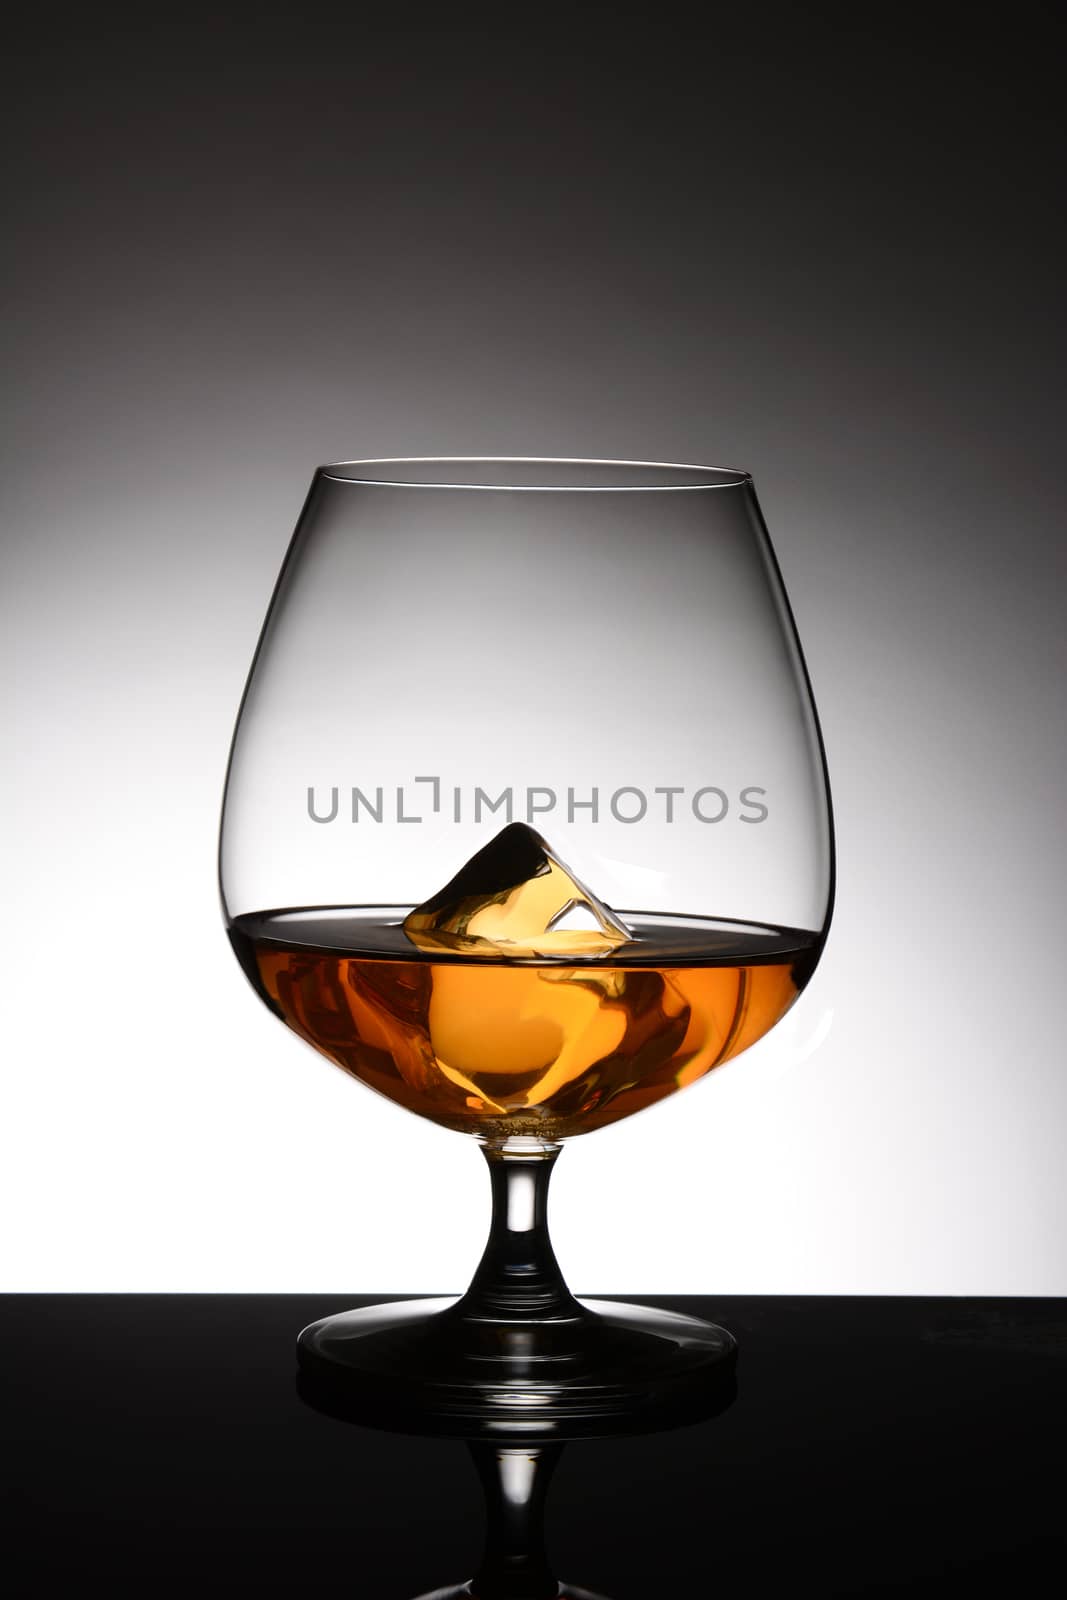 A brandy snifter with a single ice cube over a light to dark gray spot background. Vertical format.